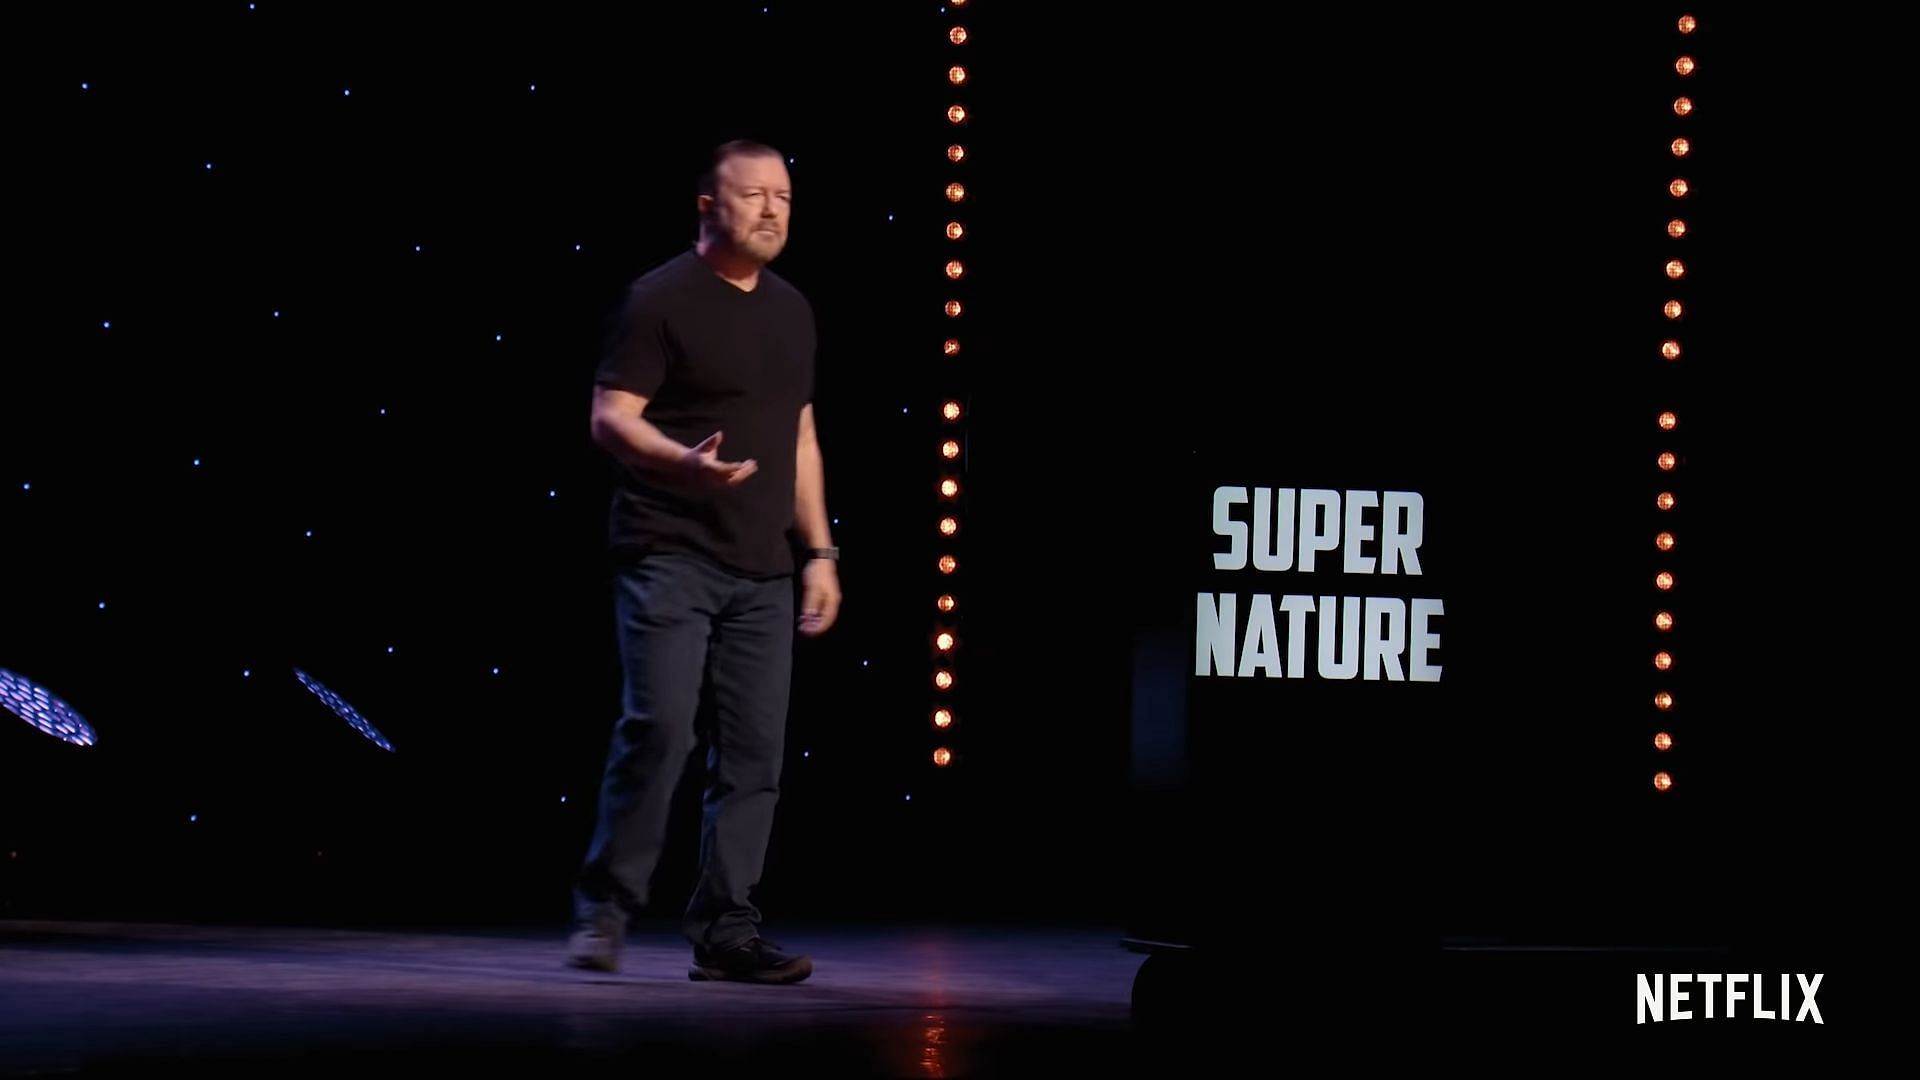 Ricky Gervais in his latest Netflix special (Image via Netflix)